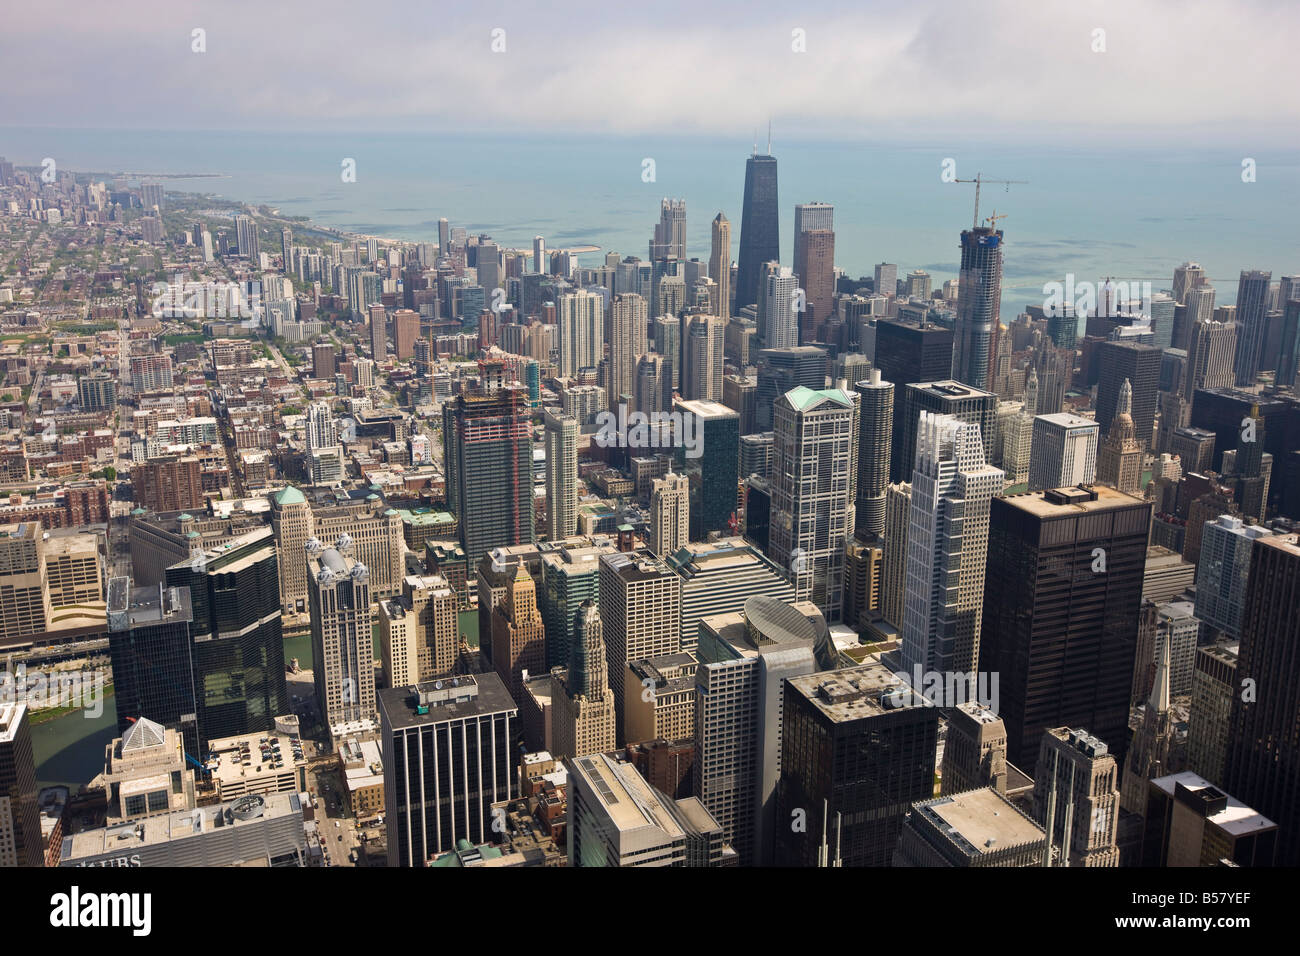 Aerial view of city skyline and Lake Michigan, looking North, Chicago, Illinois, United States of America, North America Stock Photo